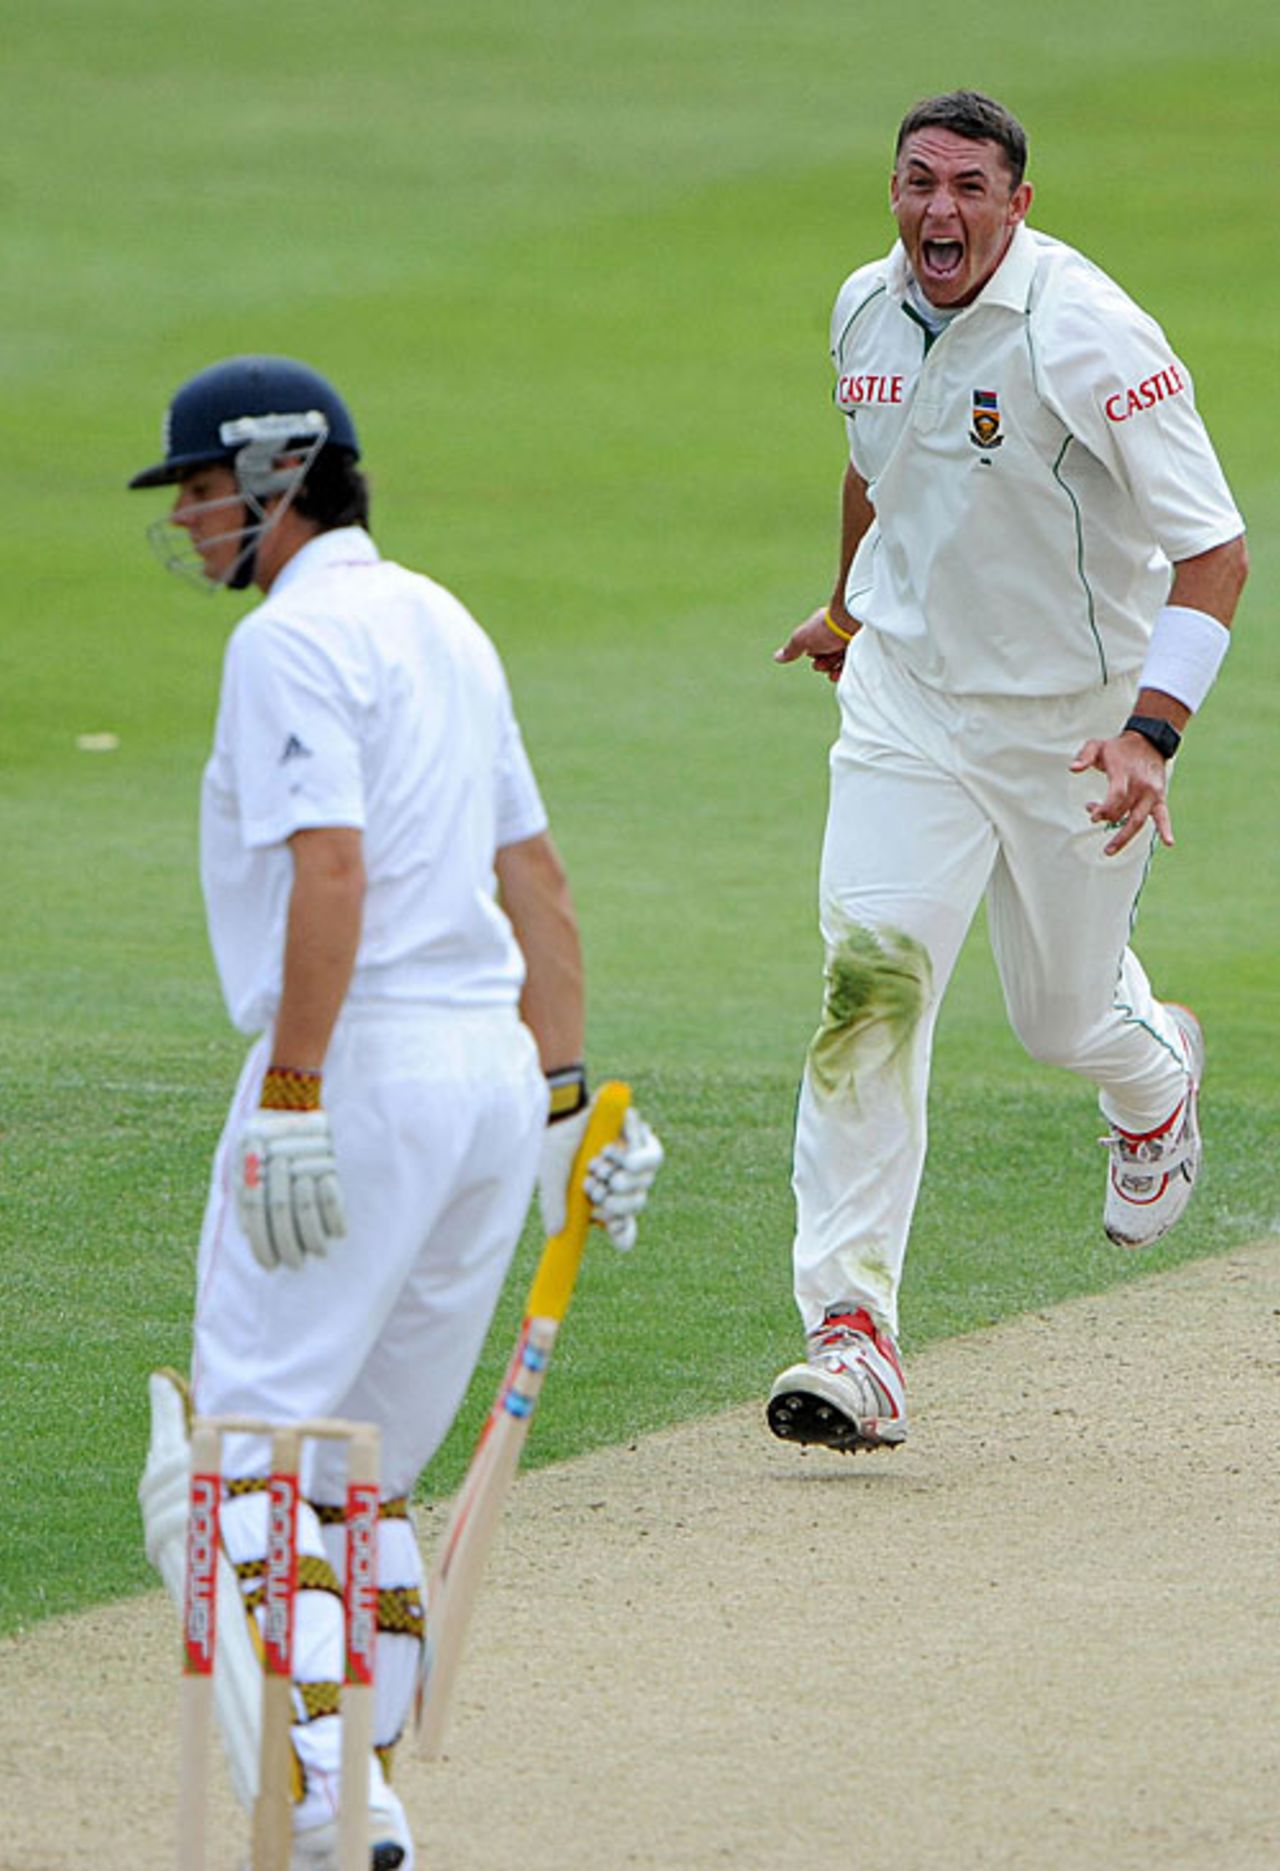 Andre Nel celebrates the wicket of his Essex team-mate, Alastair Cook, in typically enthusiastic style, England v South Africa, 3rd Test, July 30, 2008